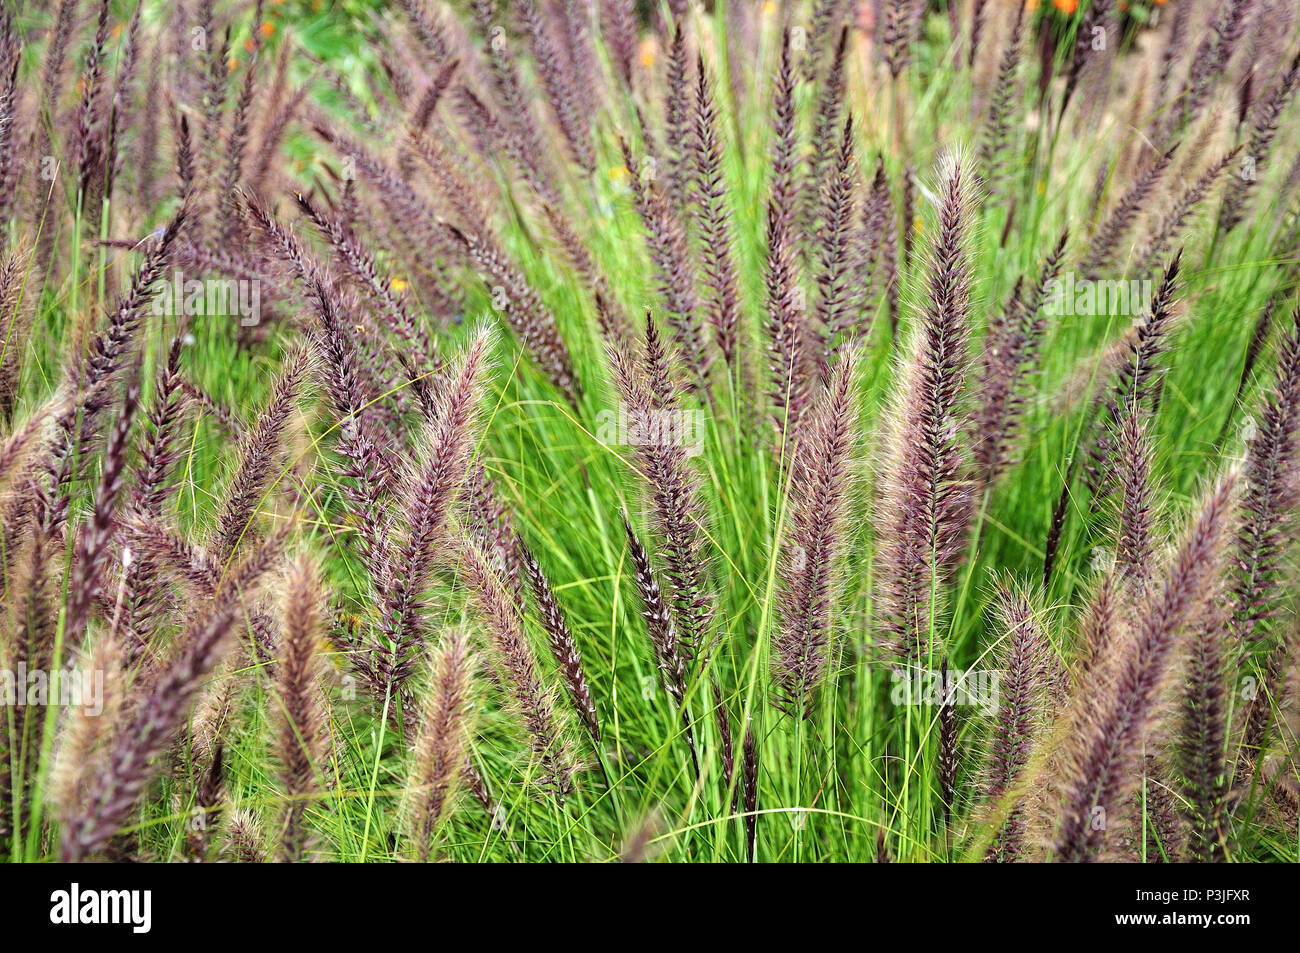 flowering foxtail fountain grass, pennisetum alopecuroides, with feathery purple inflorescences Stock Photo